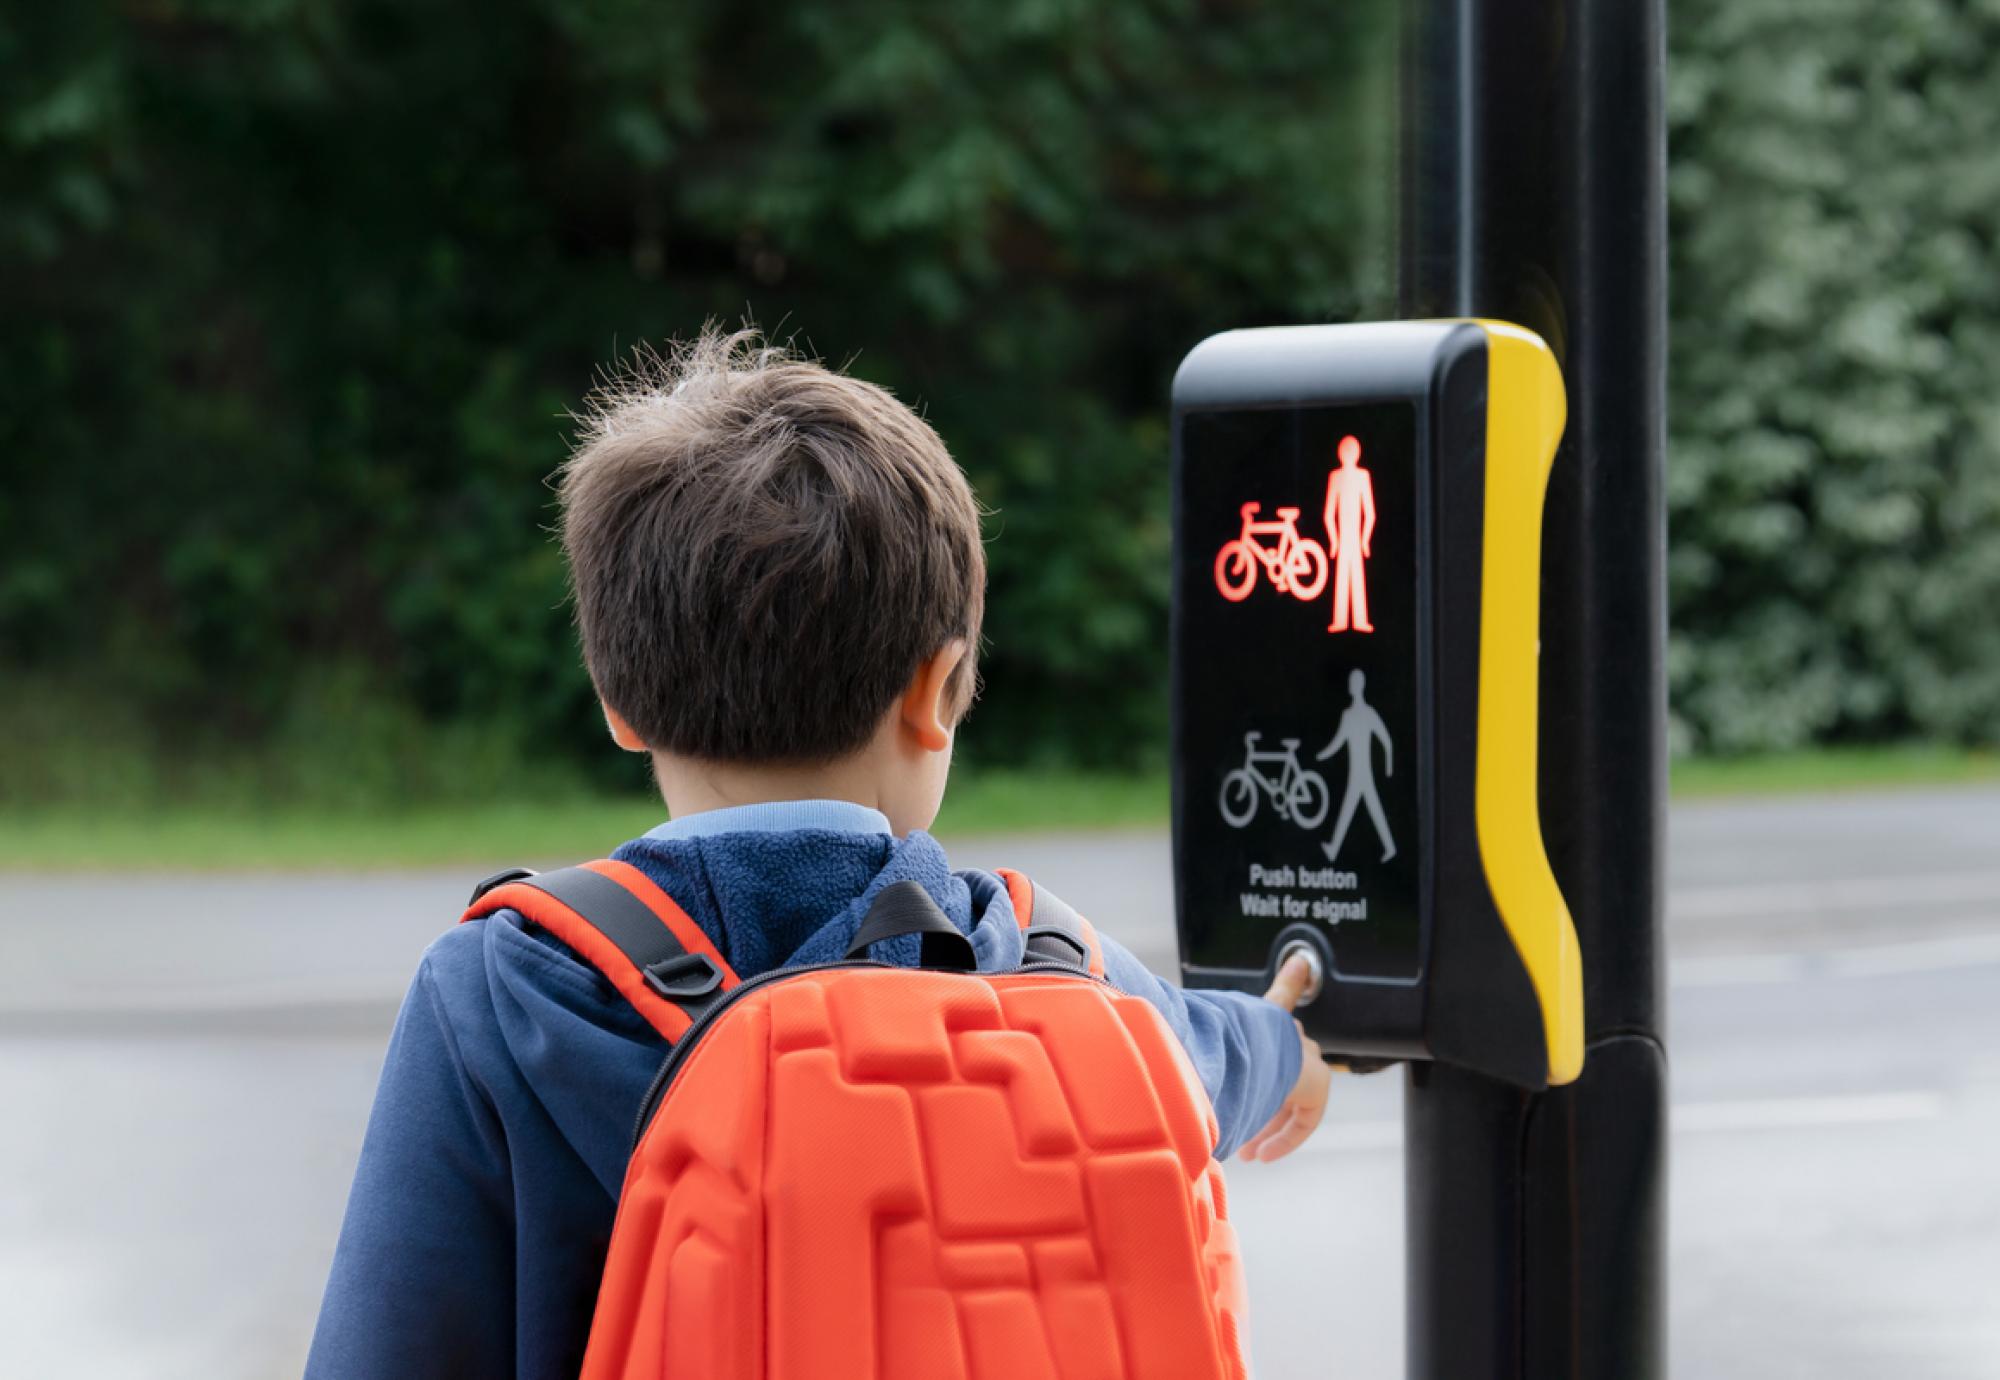 School kid pressing a button at traffic lights on pedestrian crossing on way to school